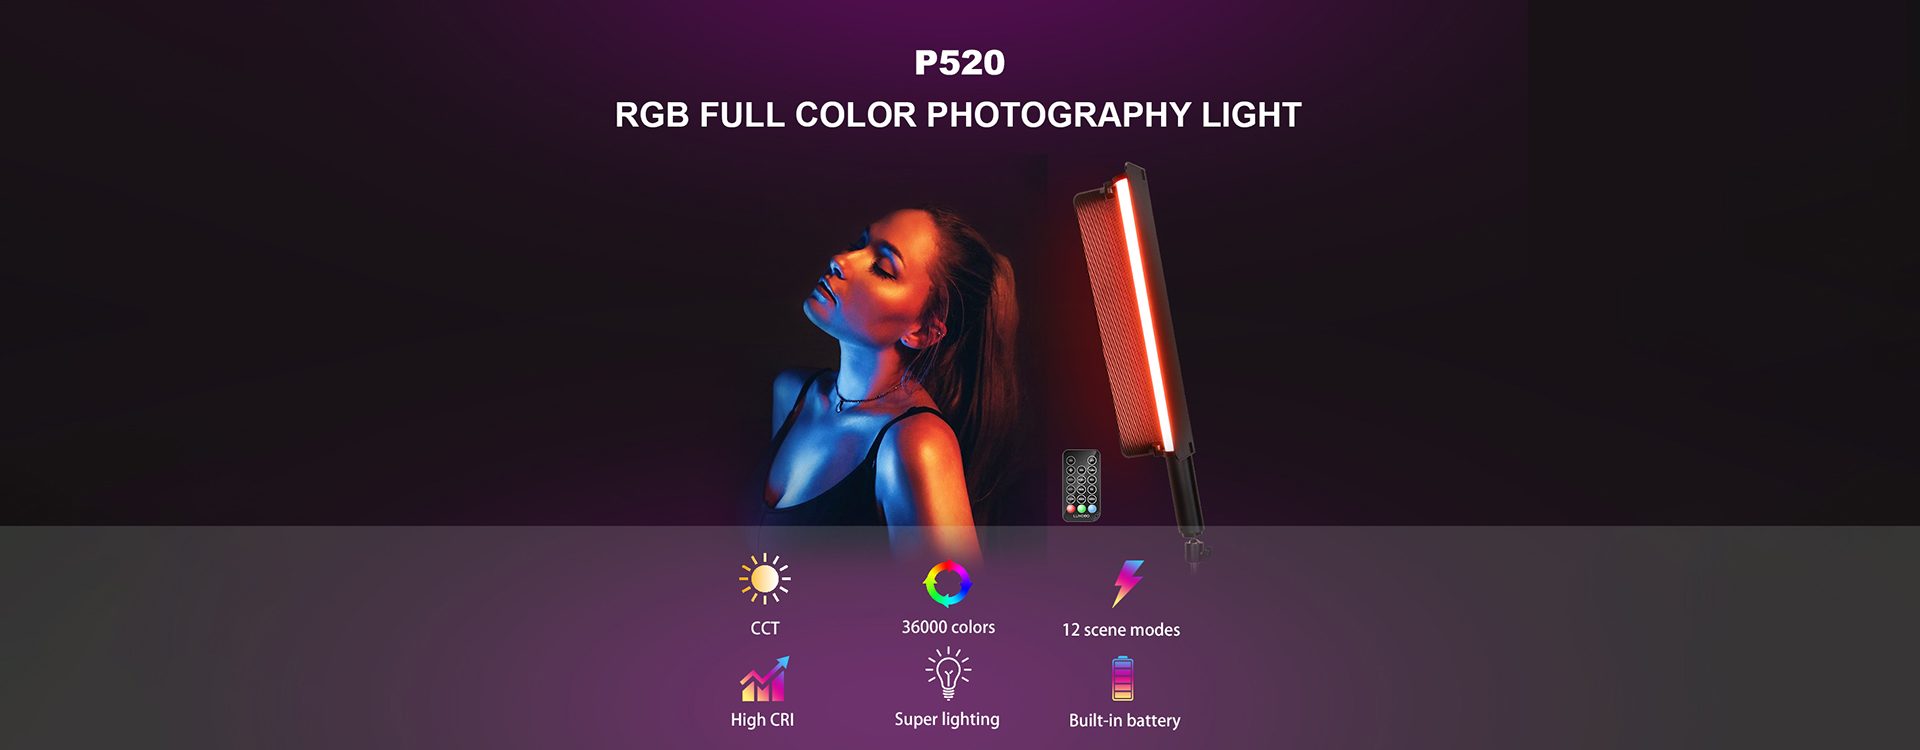 P520 Full color photography light